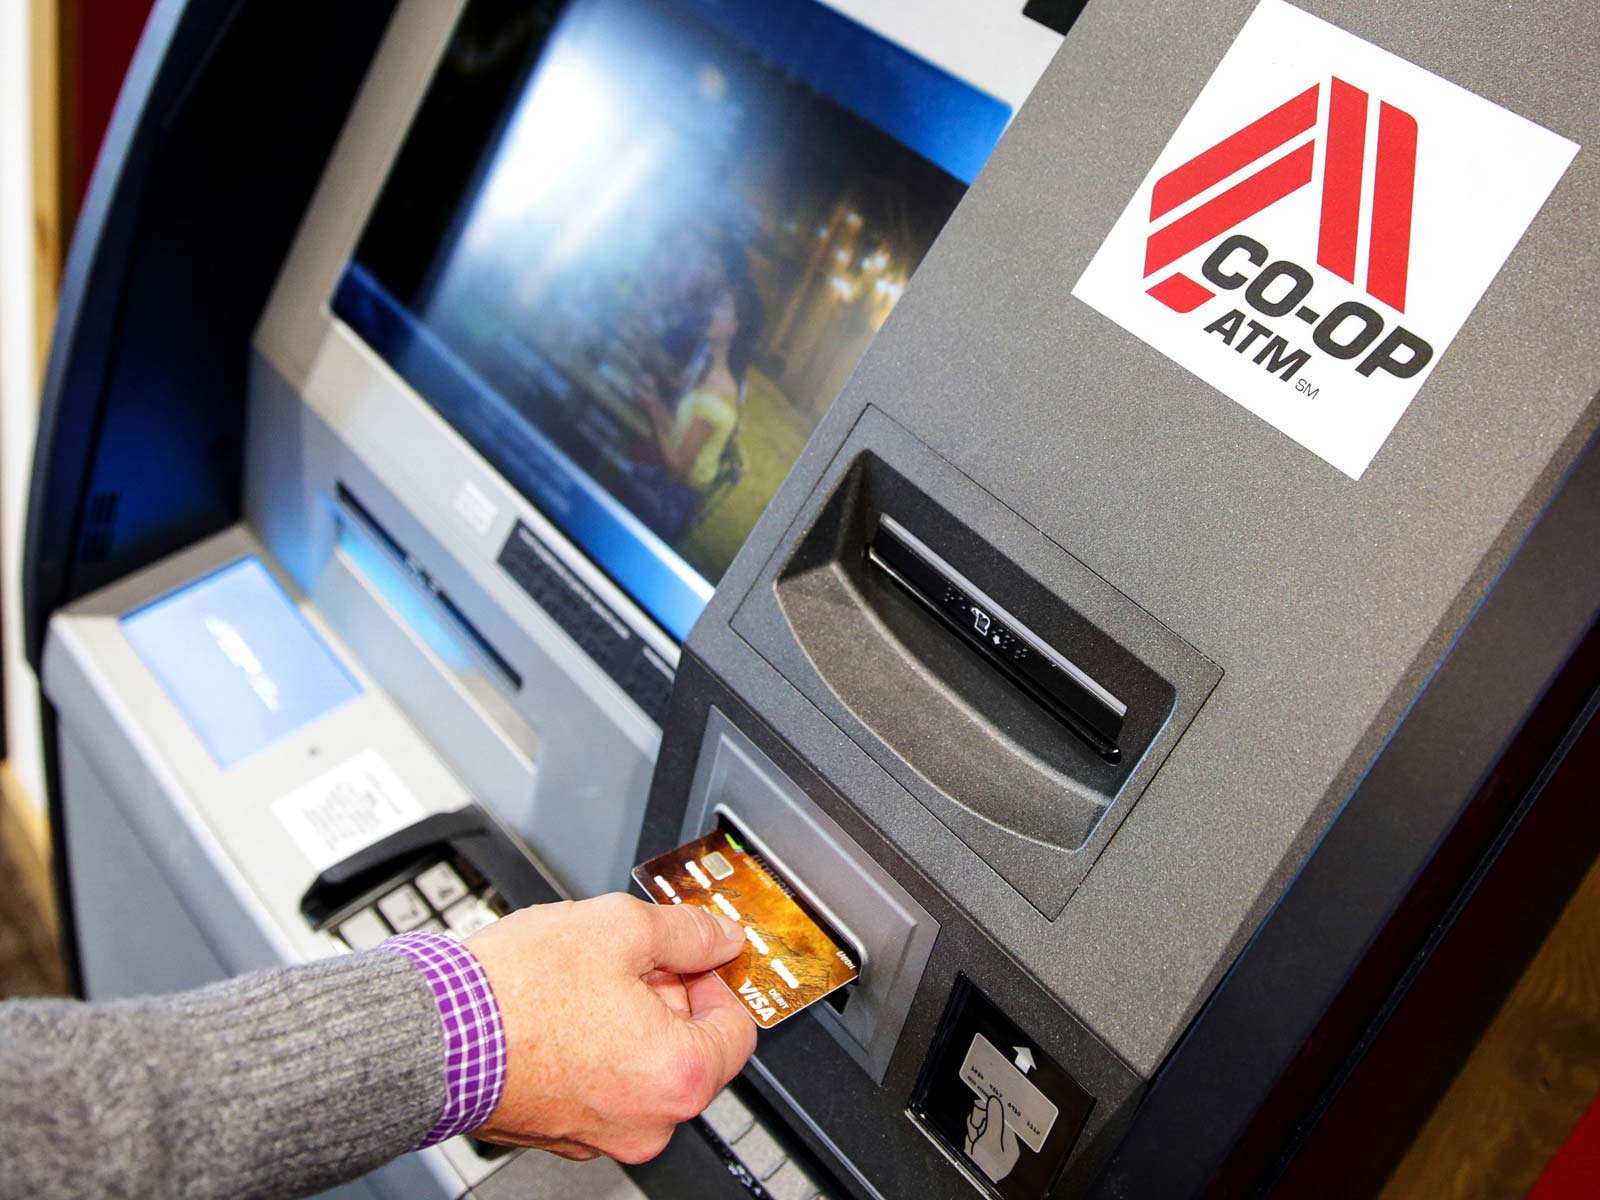 Man inserts bank card into Co-Op ATM